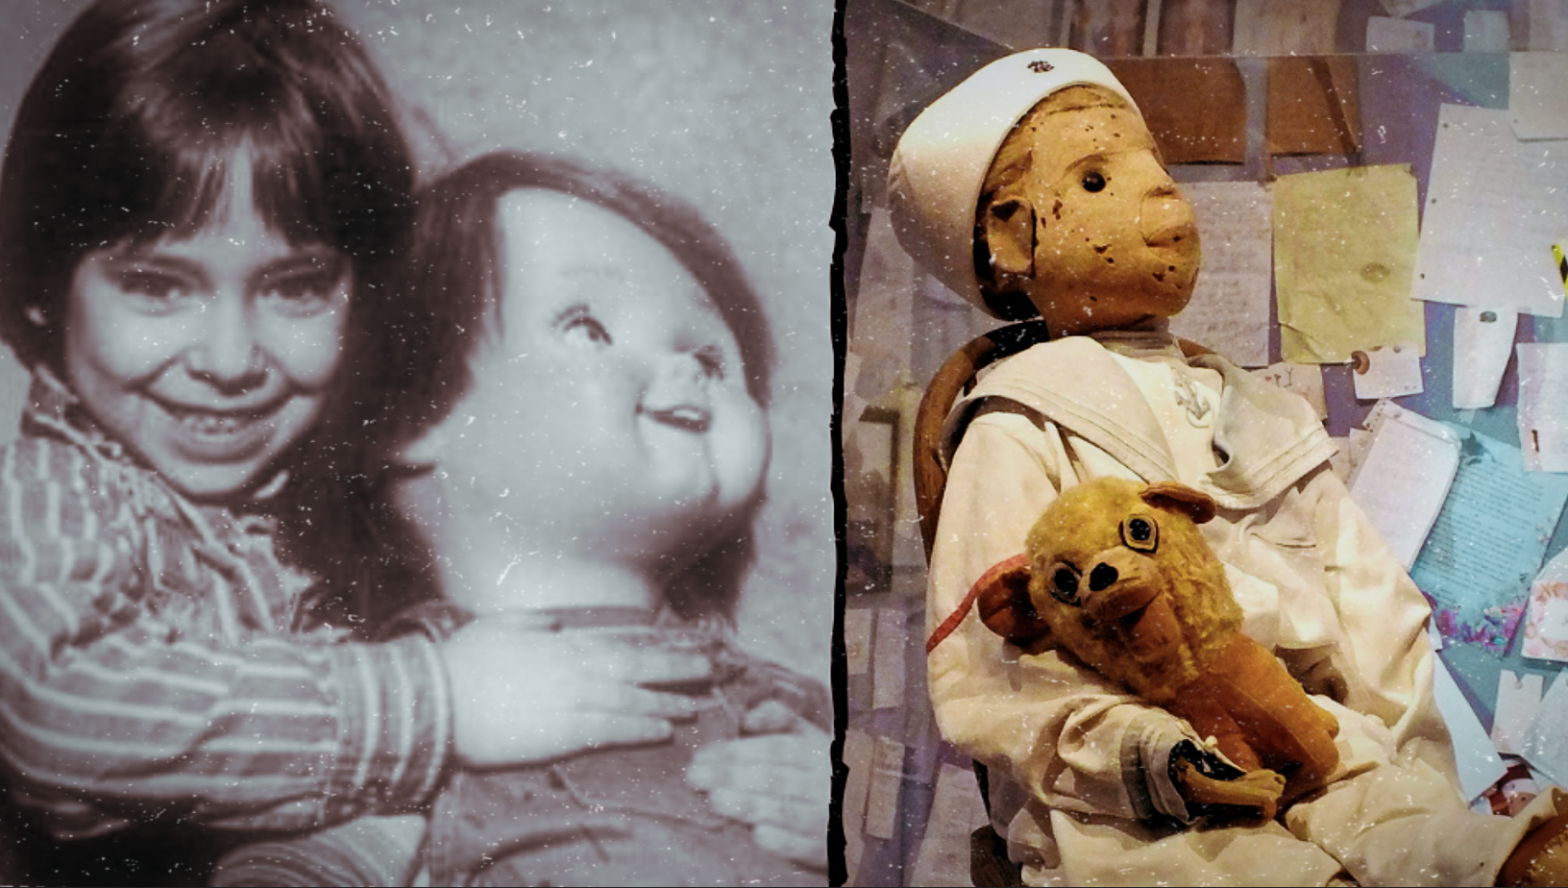 The diabolical Chucky doll was inspired by the true story of a doll who until today, is still possessed